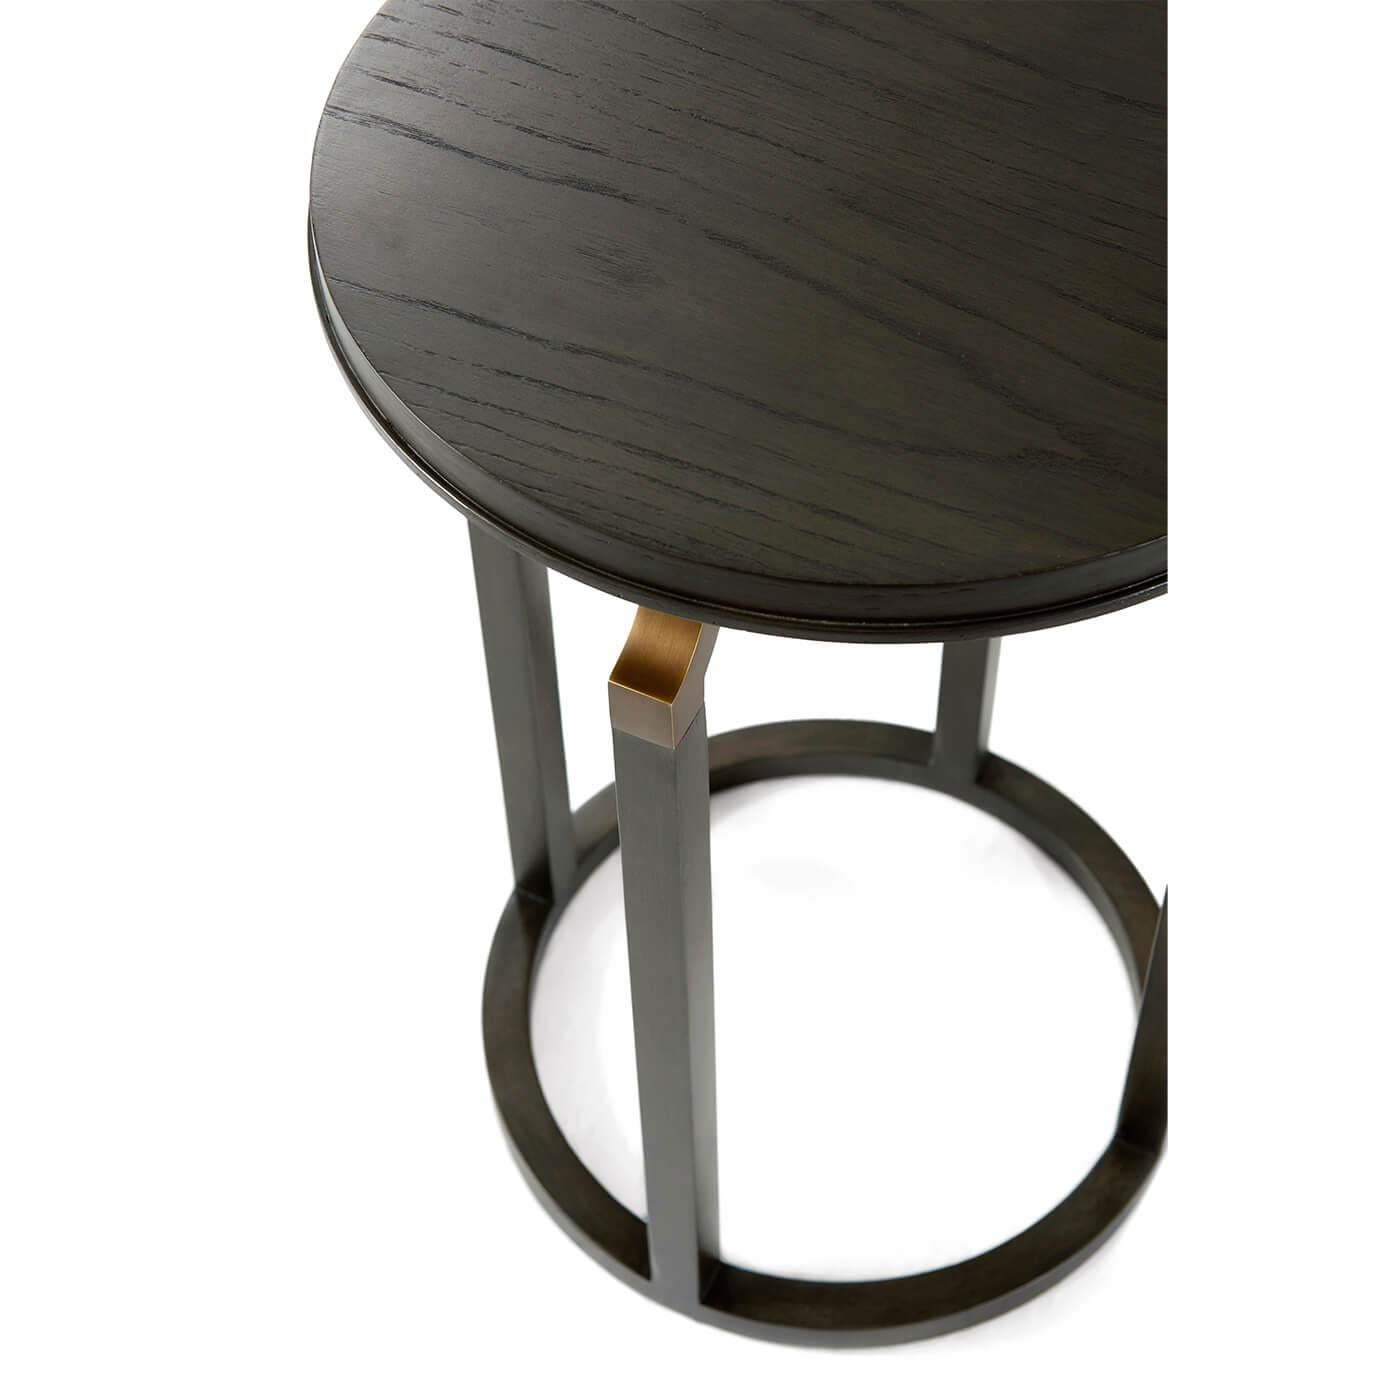 Vietnamese Small Art Deco Accent Table For Sale